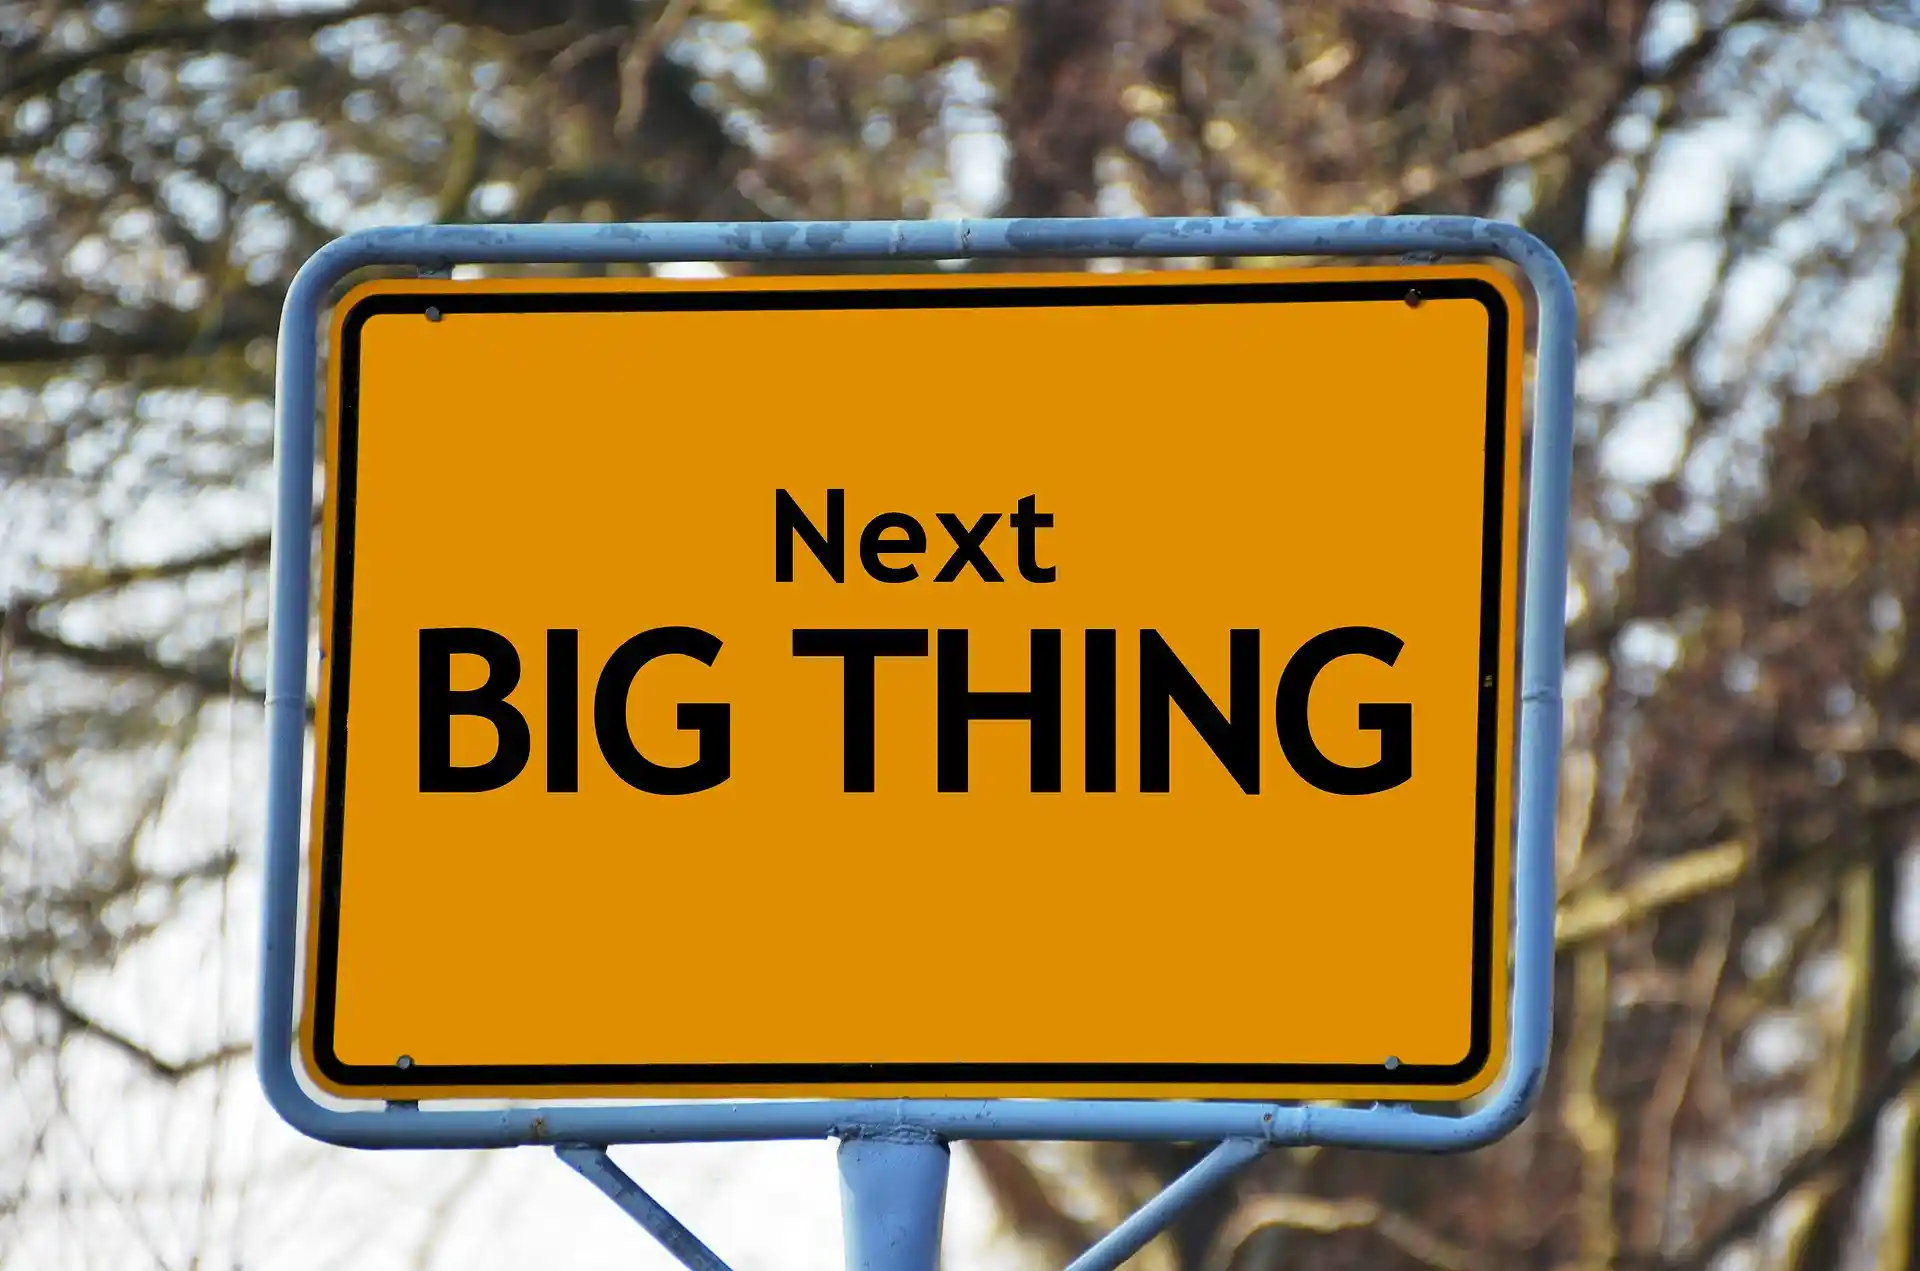 Image of a place name sign, yellow, blue metal frame, with black lettering spelling out "Next Big Thing". Image by Gerd Altmann from Pixabay.